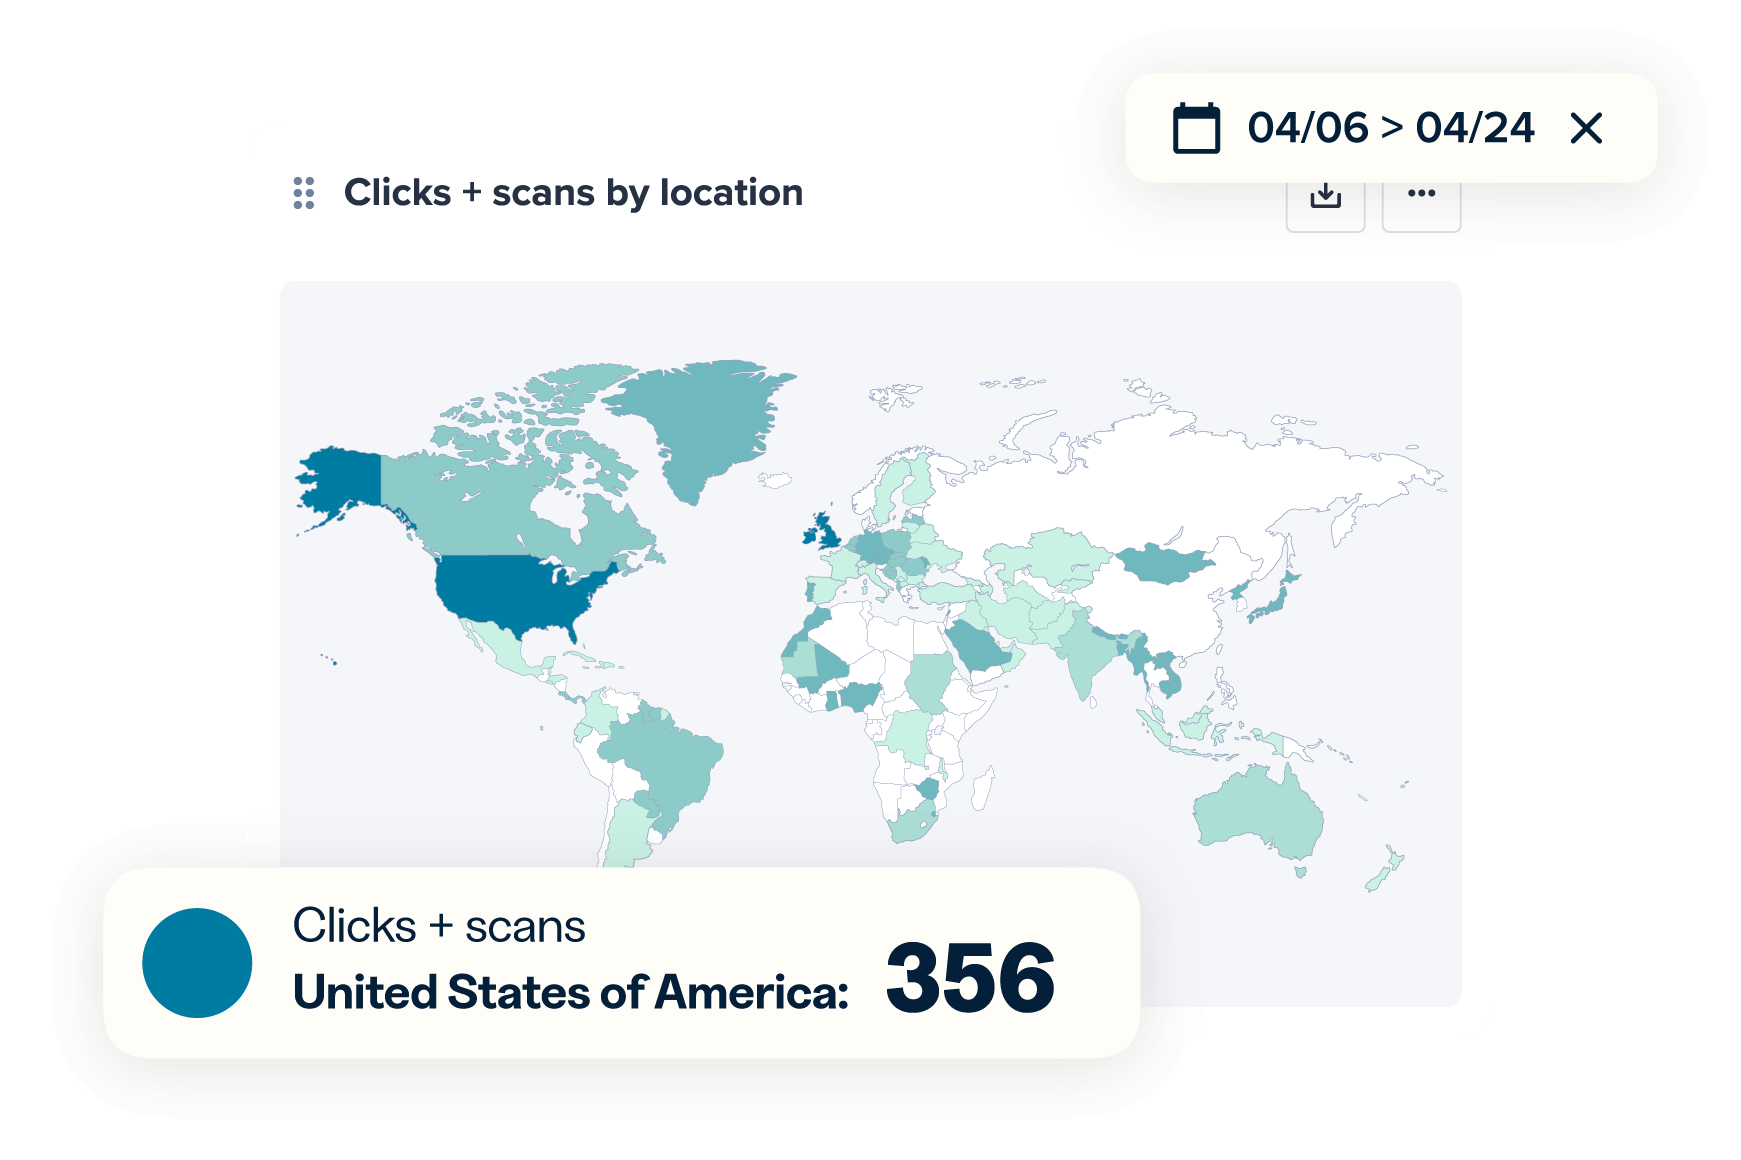  Clicks + scans by location geographical map with clicks + scans from the US singled out